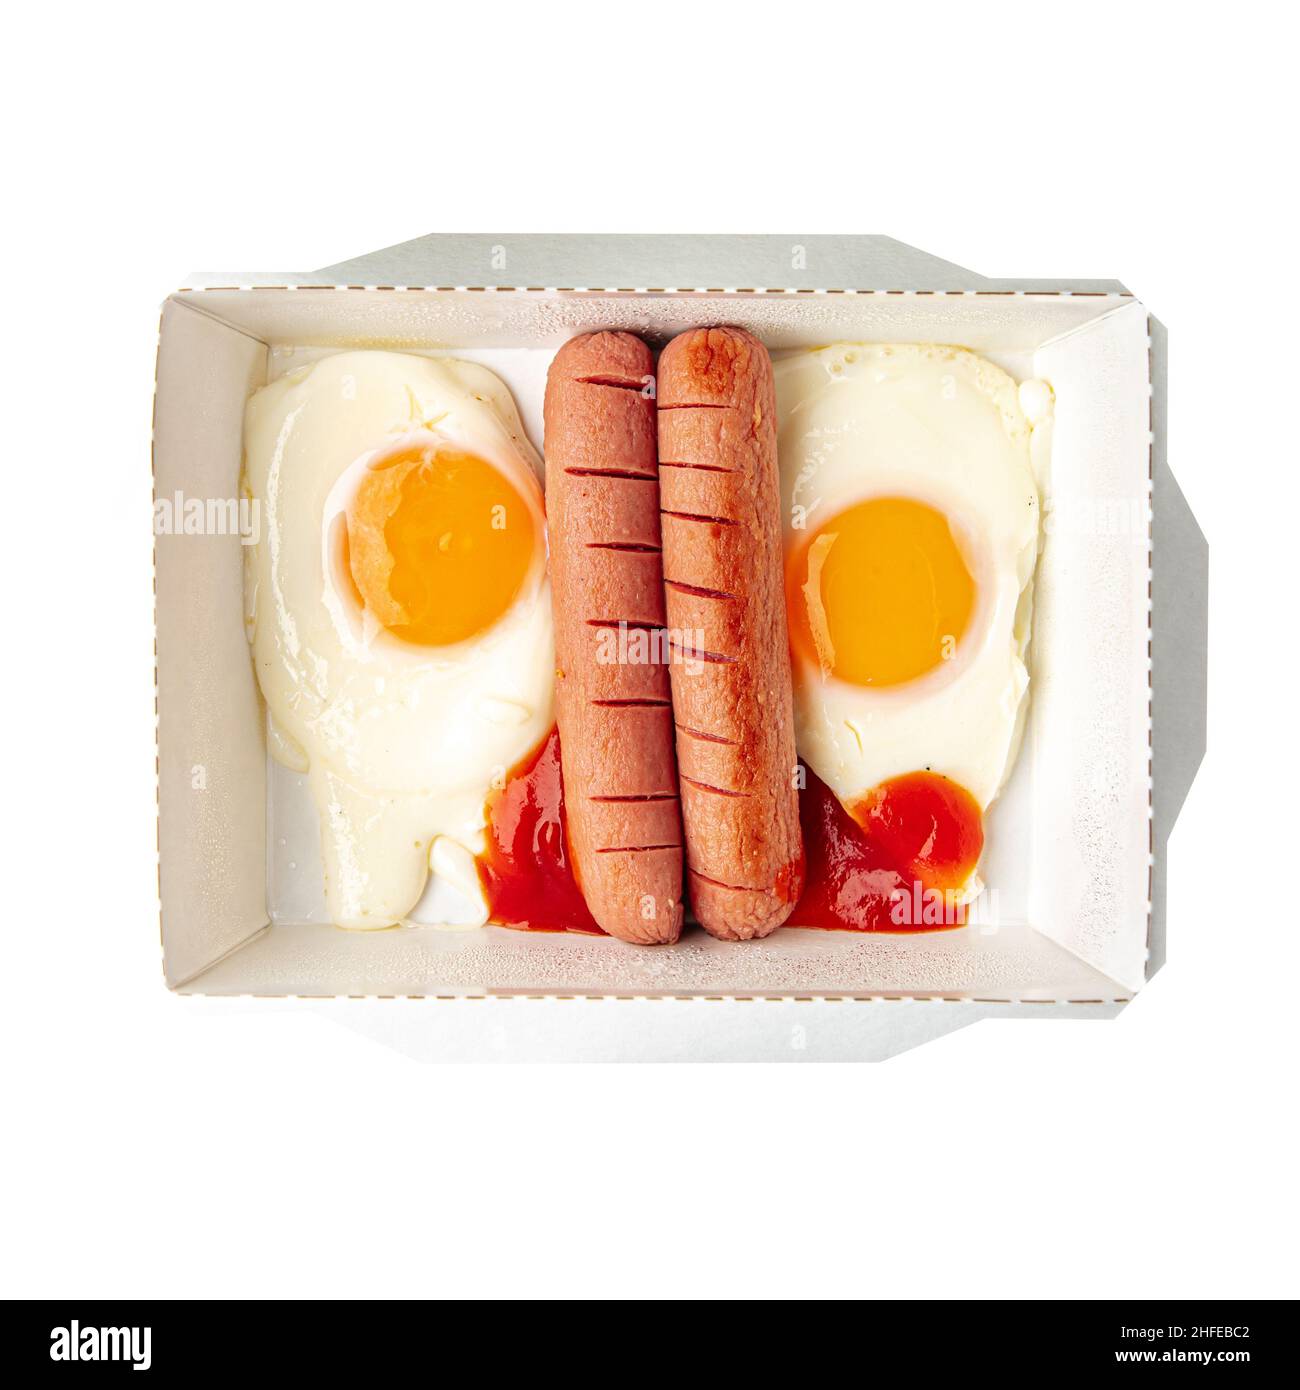 Isolated take away breakfast with egg and sausages Stock Photo